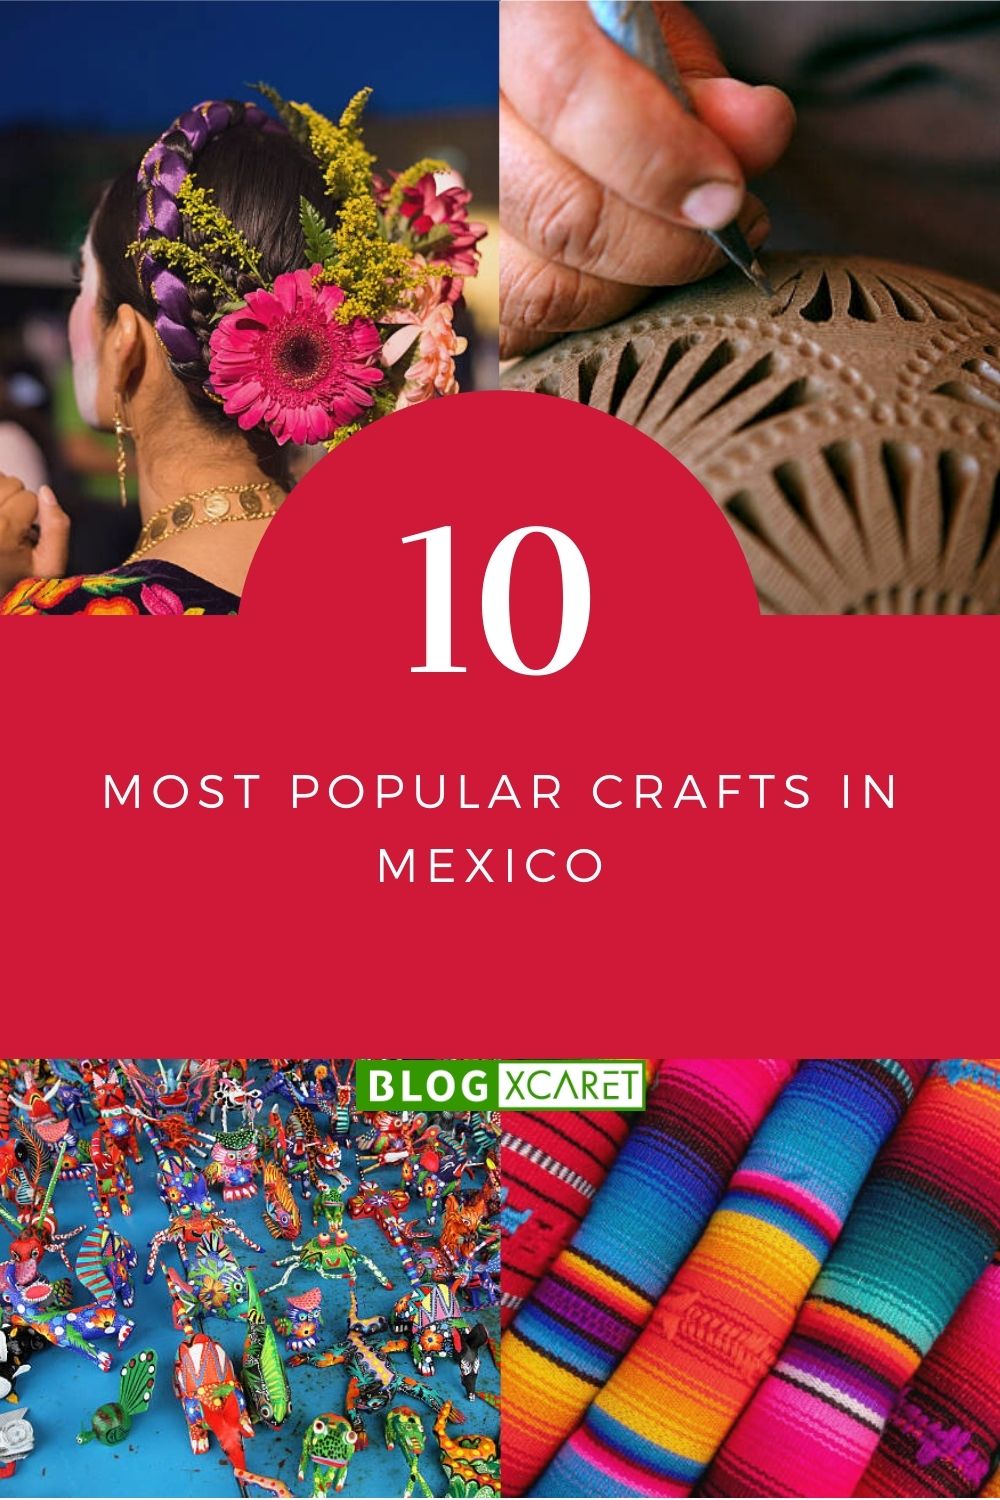 10 most popular crafts in Mexico